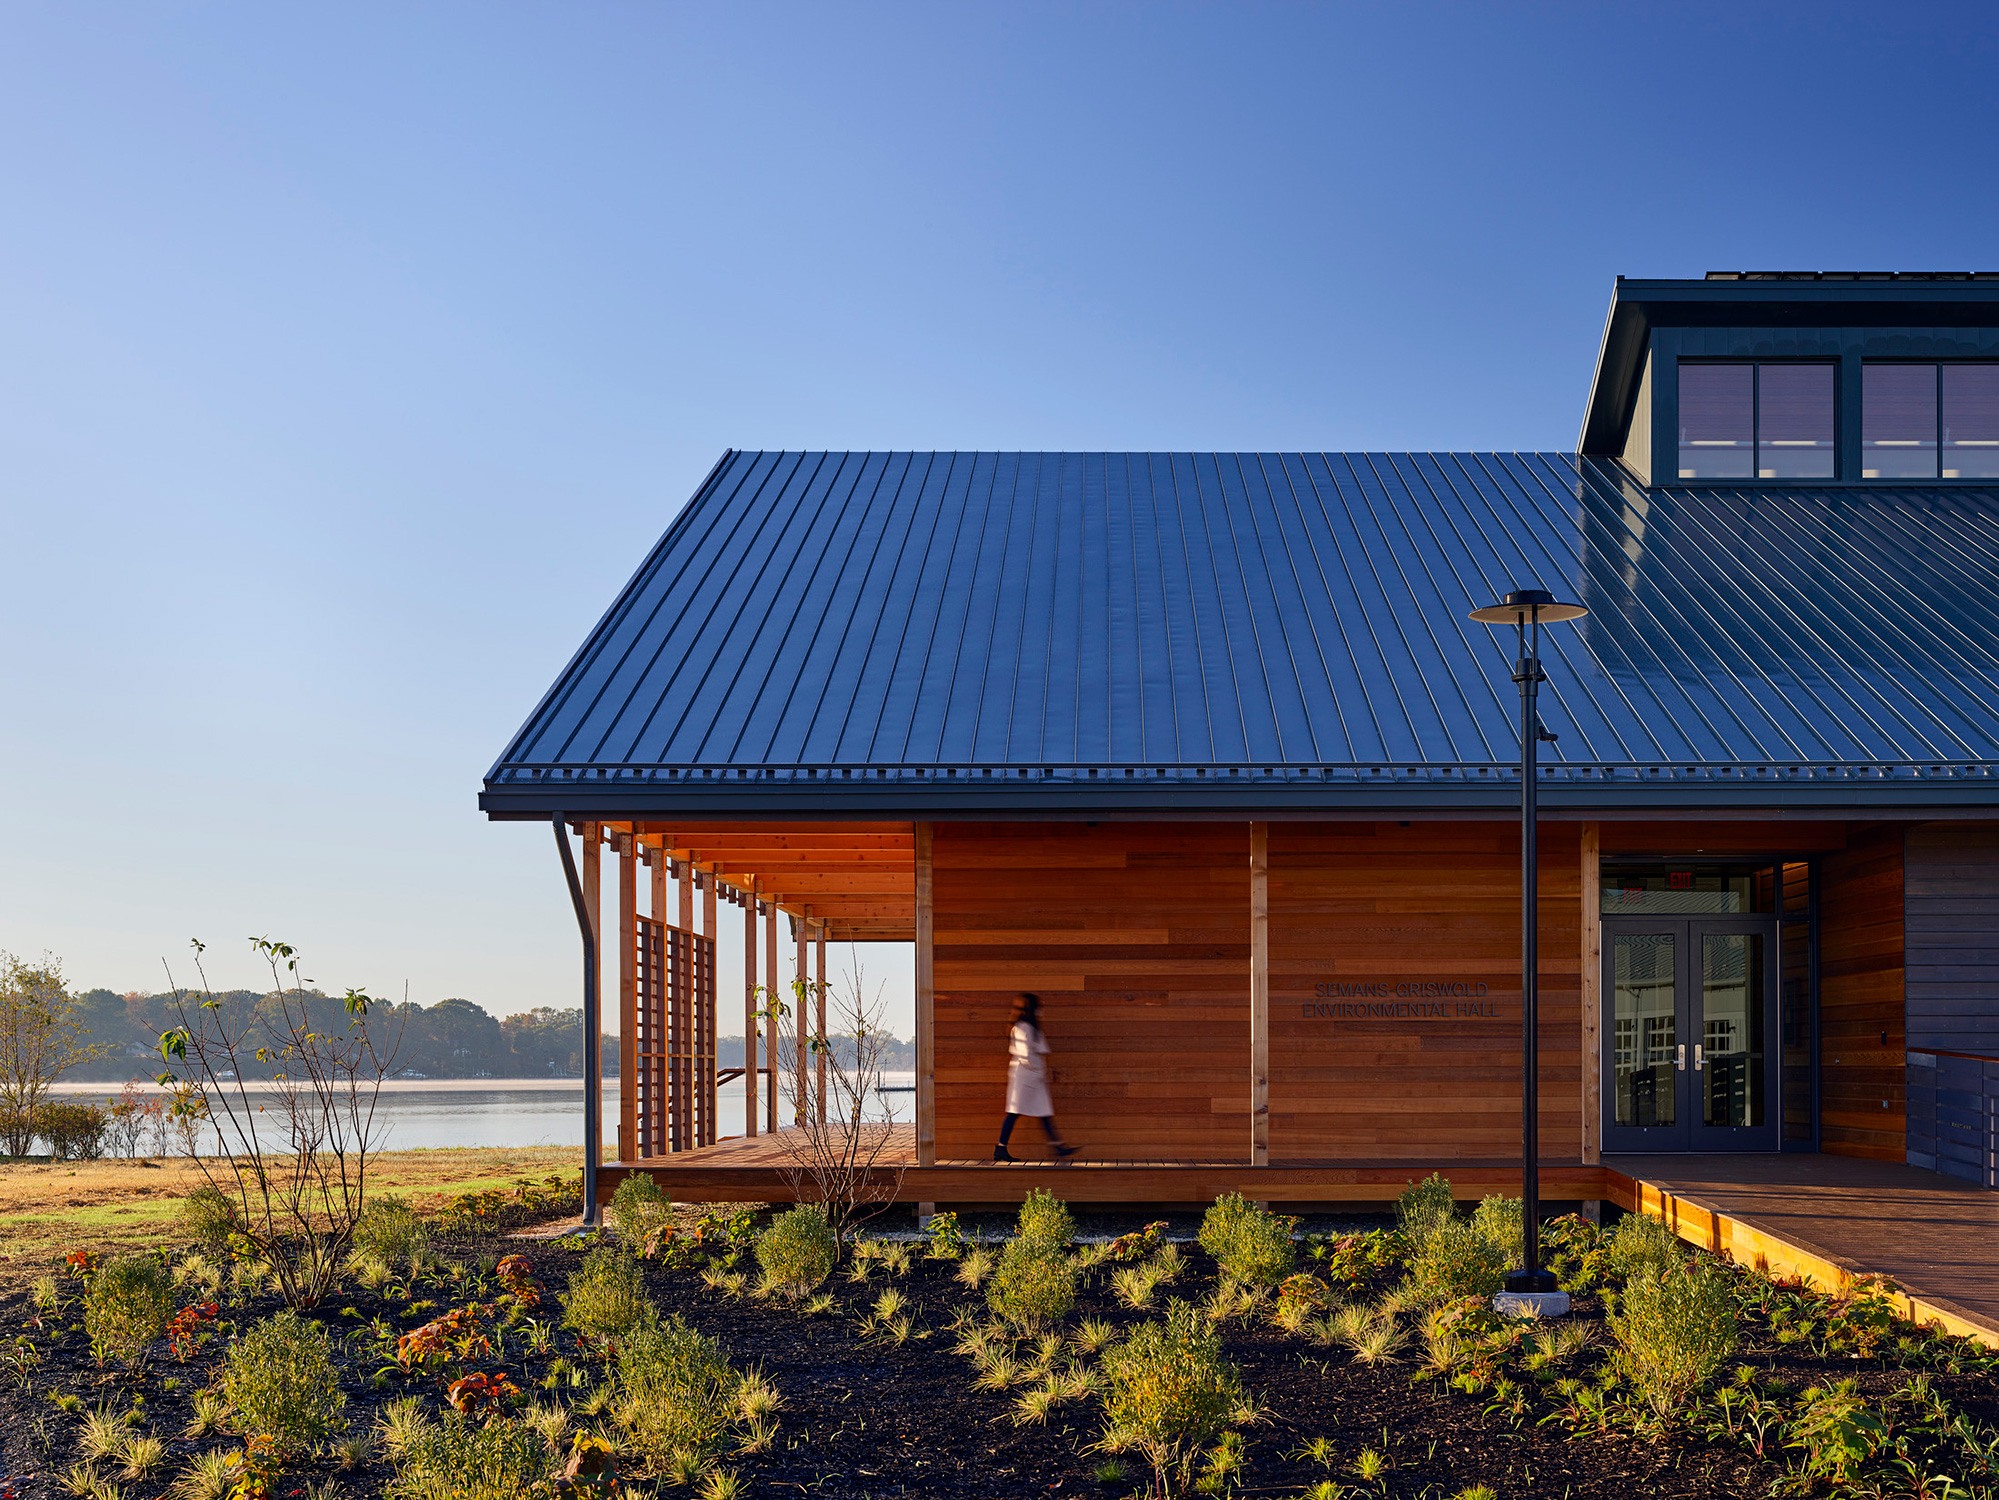 Wood and metal complement the simple form and preserve the local waterfront vernacular.